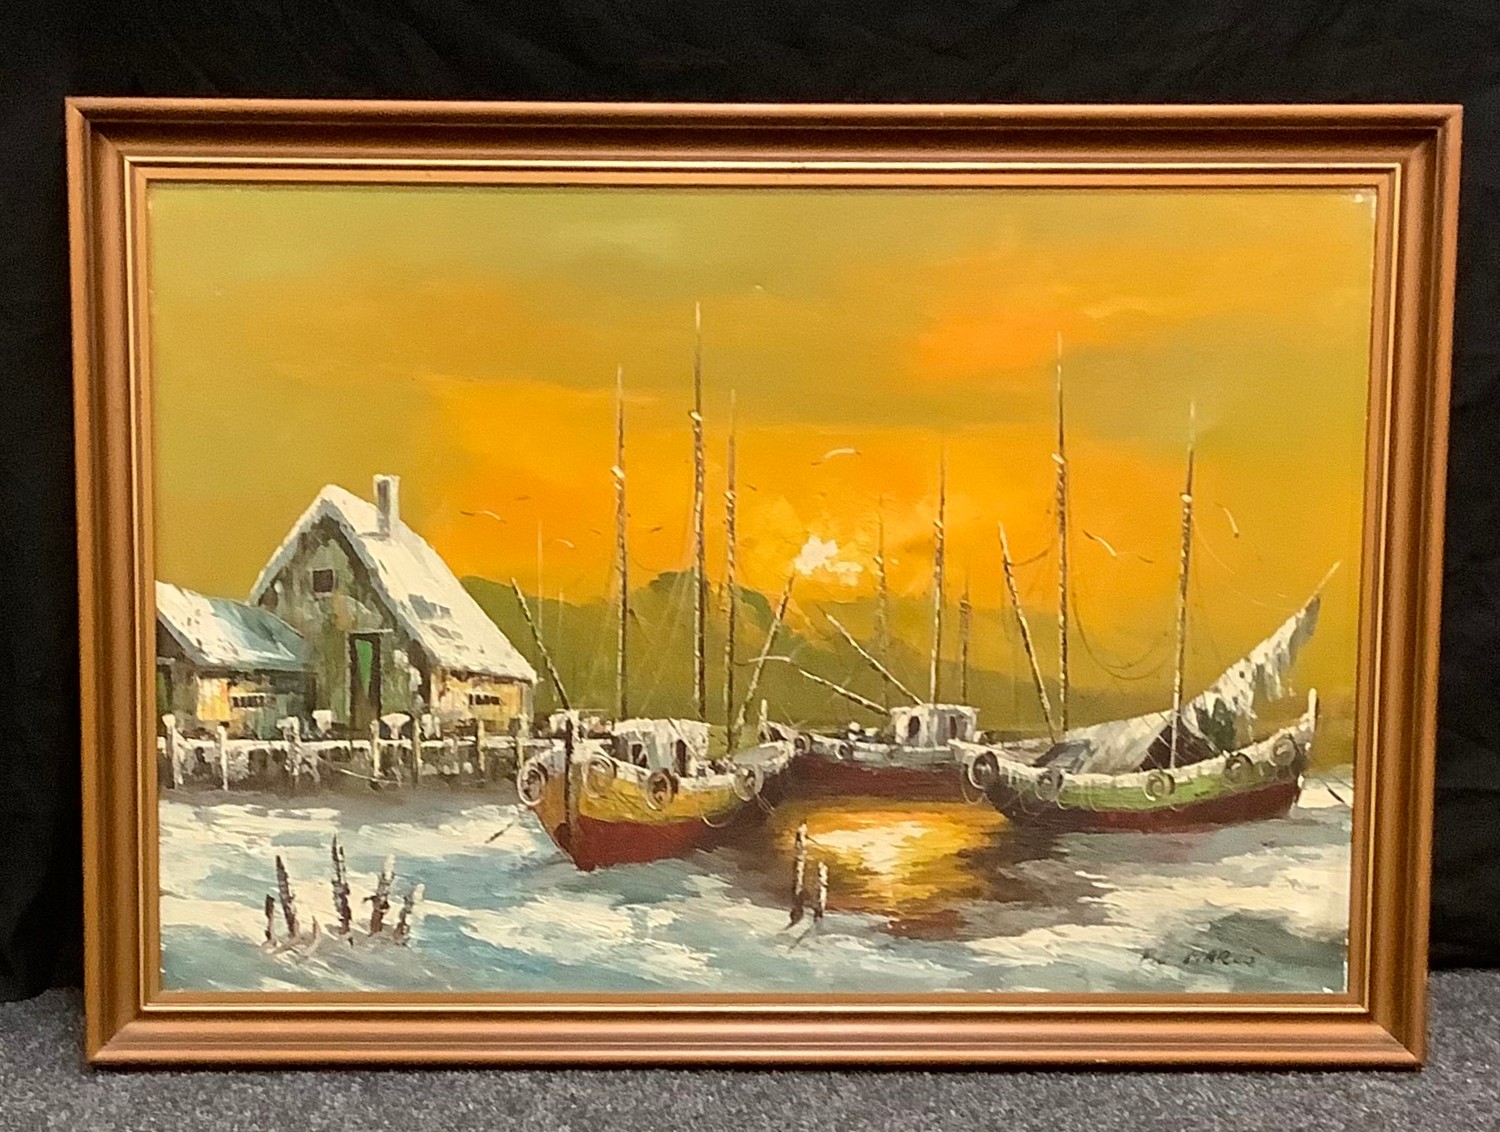 De Marco ,20th century, Wintry Sunset over the Harbour, signed, impasto oil on canvas, 60cm x 90cm